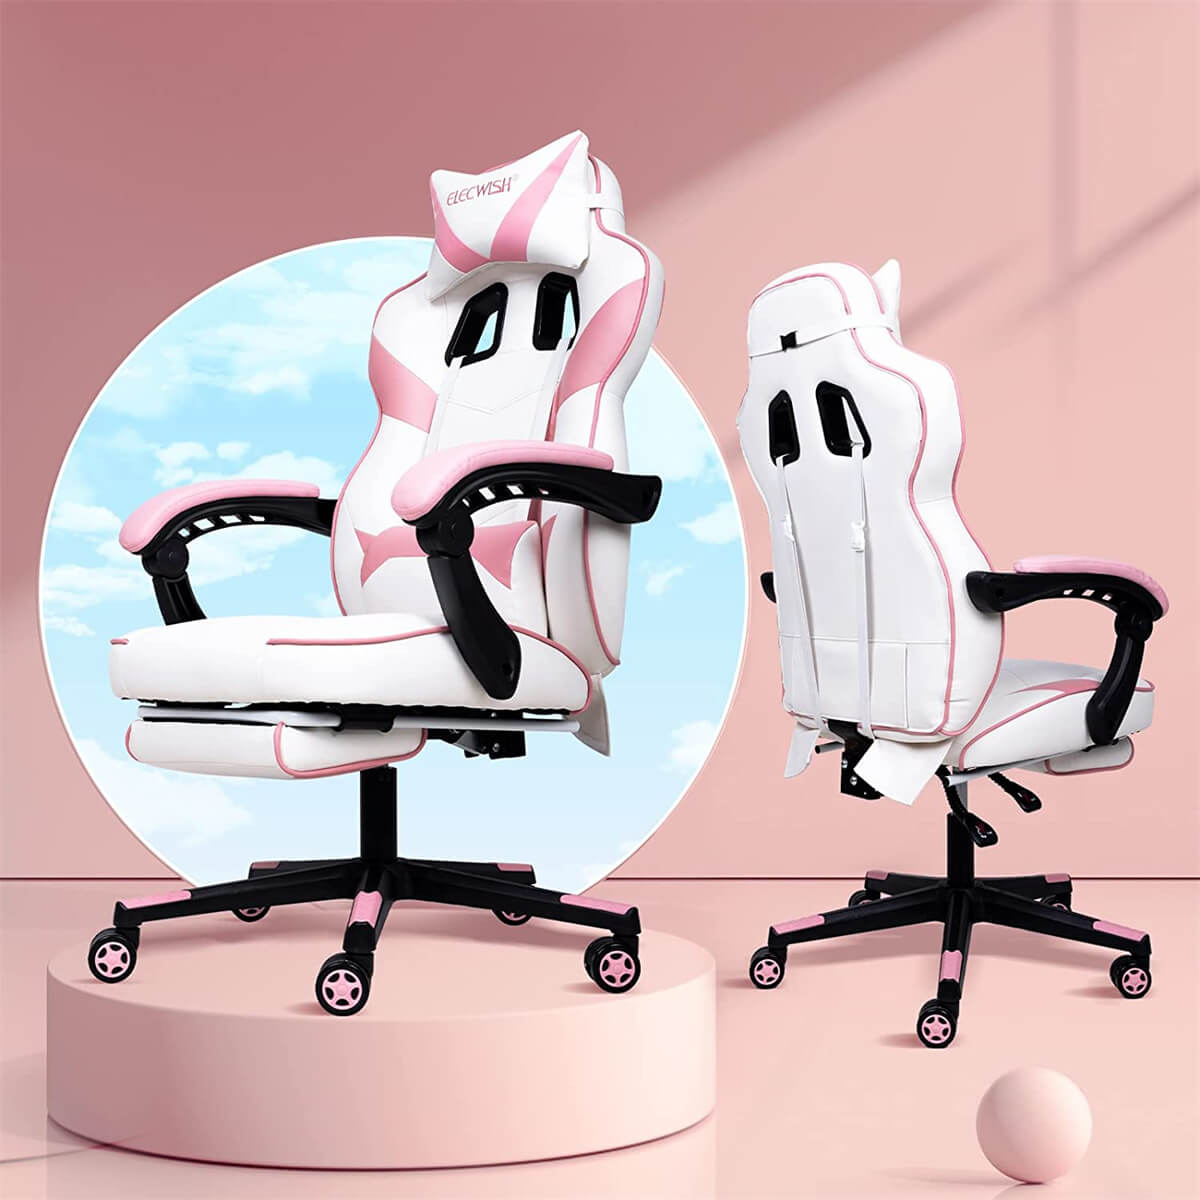 Elecwish Video Game Chairs Pink Gaming Chair With Footrest OC087 displays